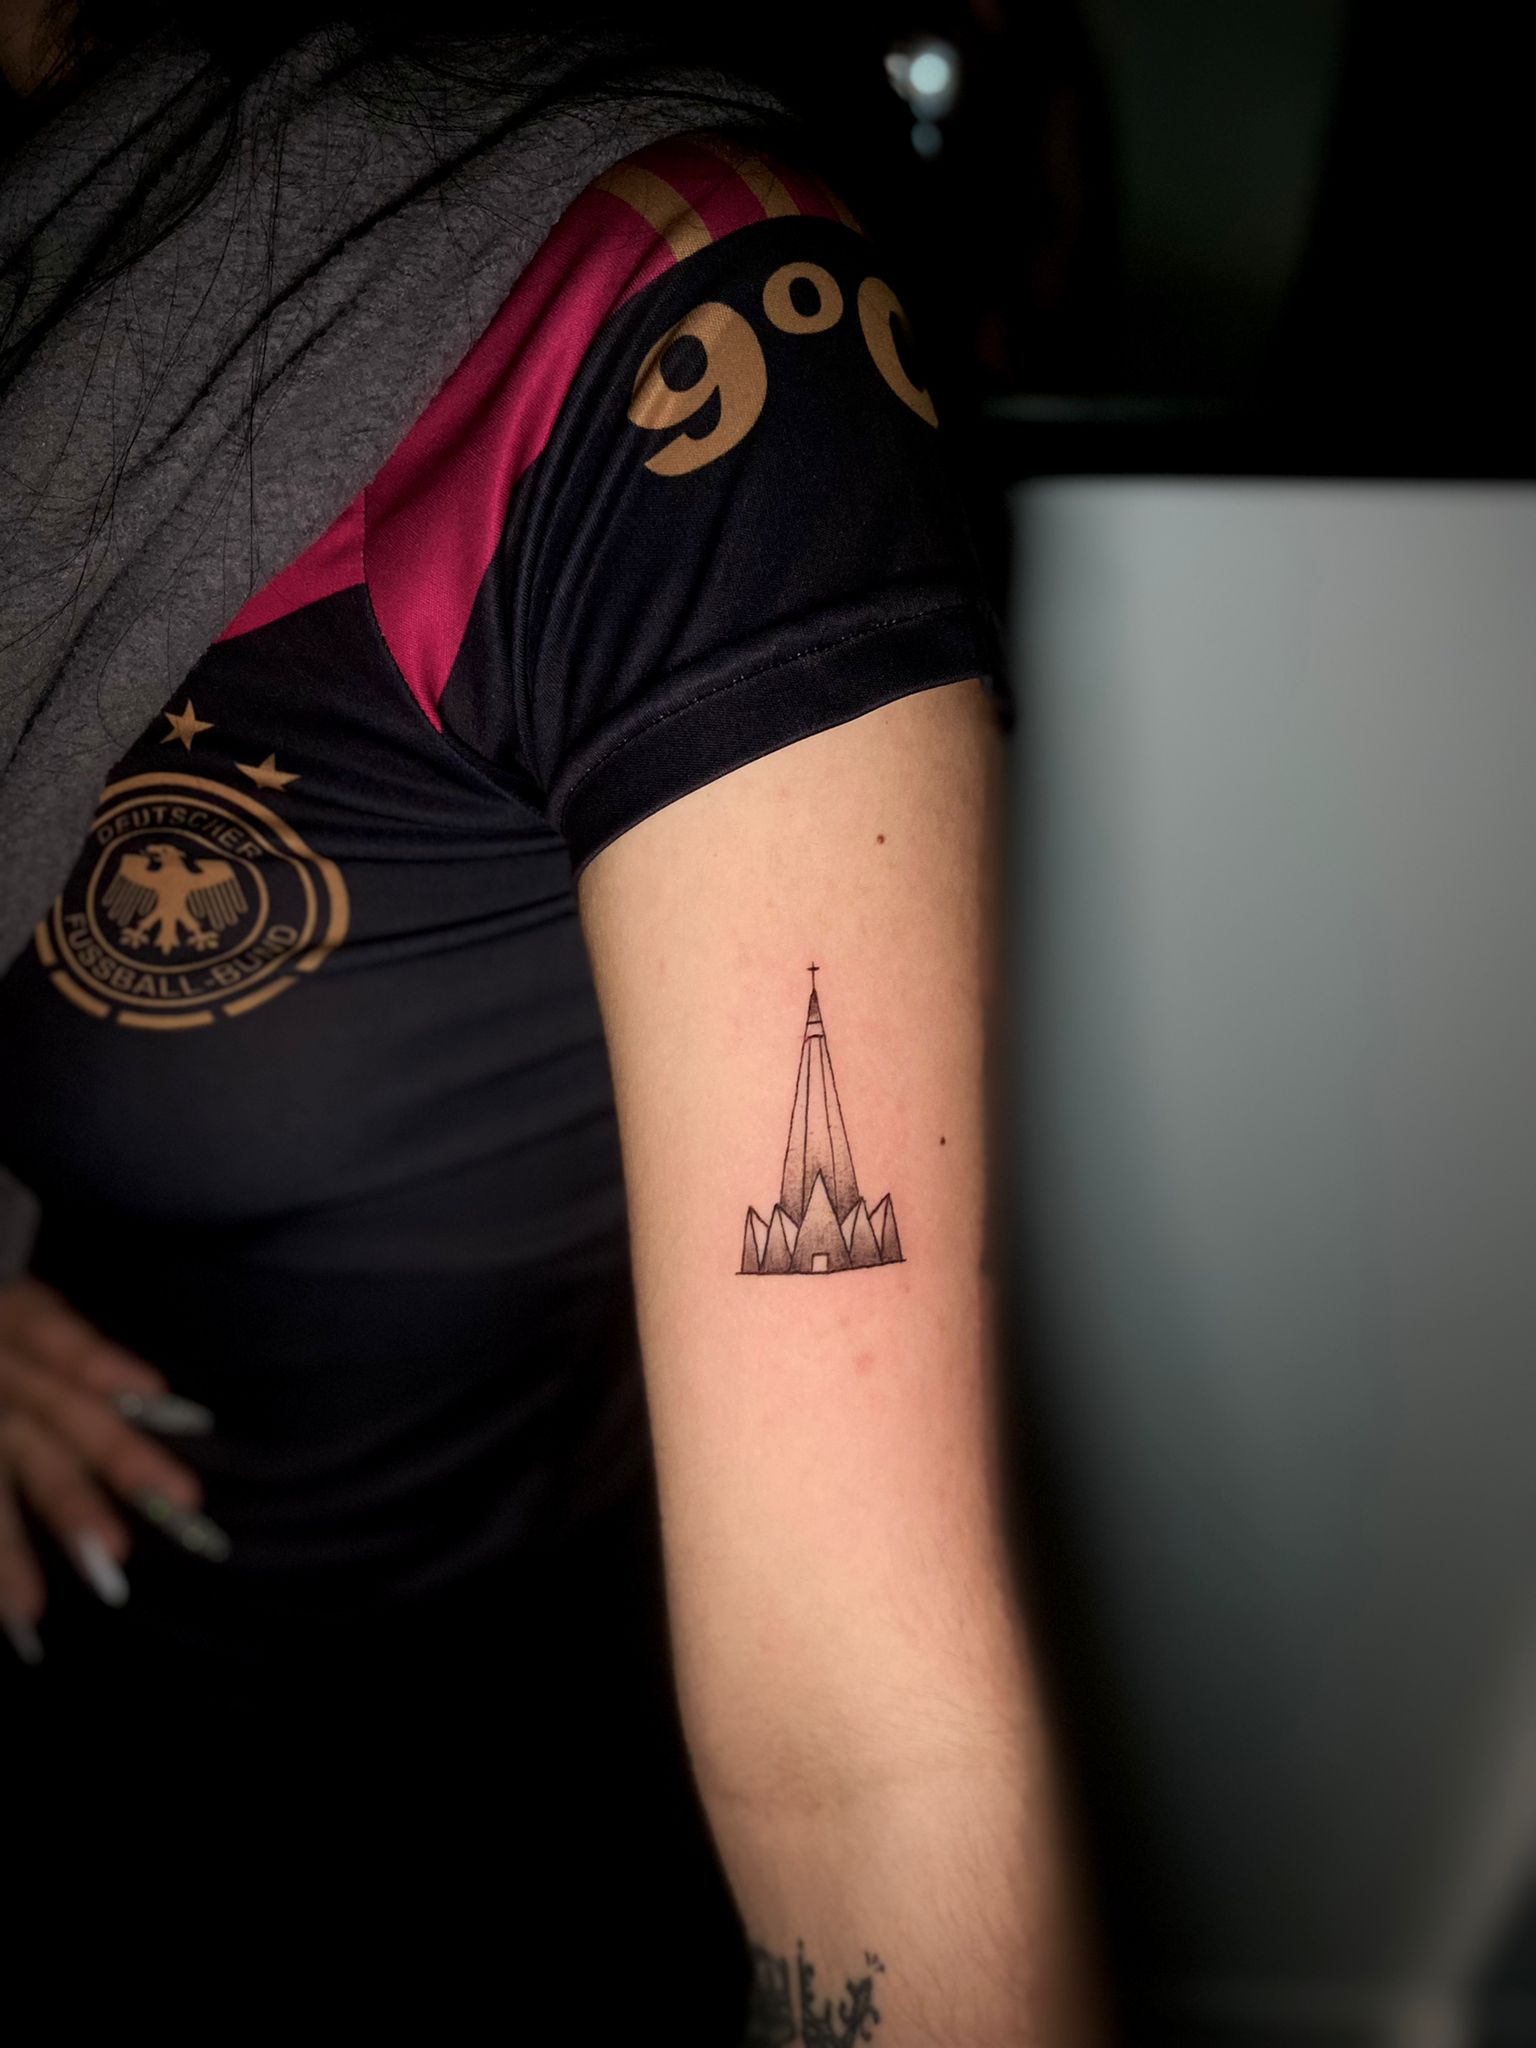 Maringa, who lives in the United States, gets a cathedral tattoo: 